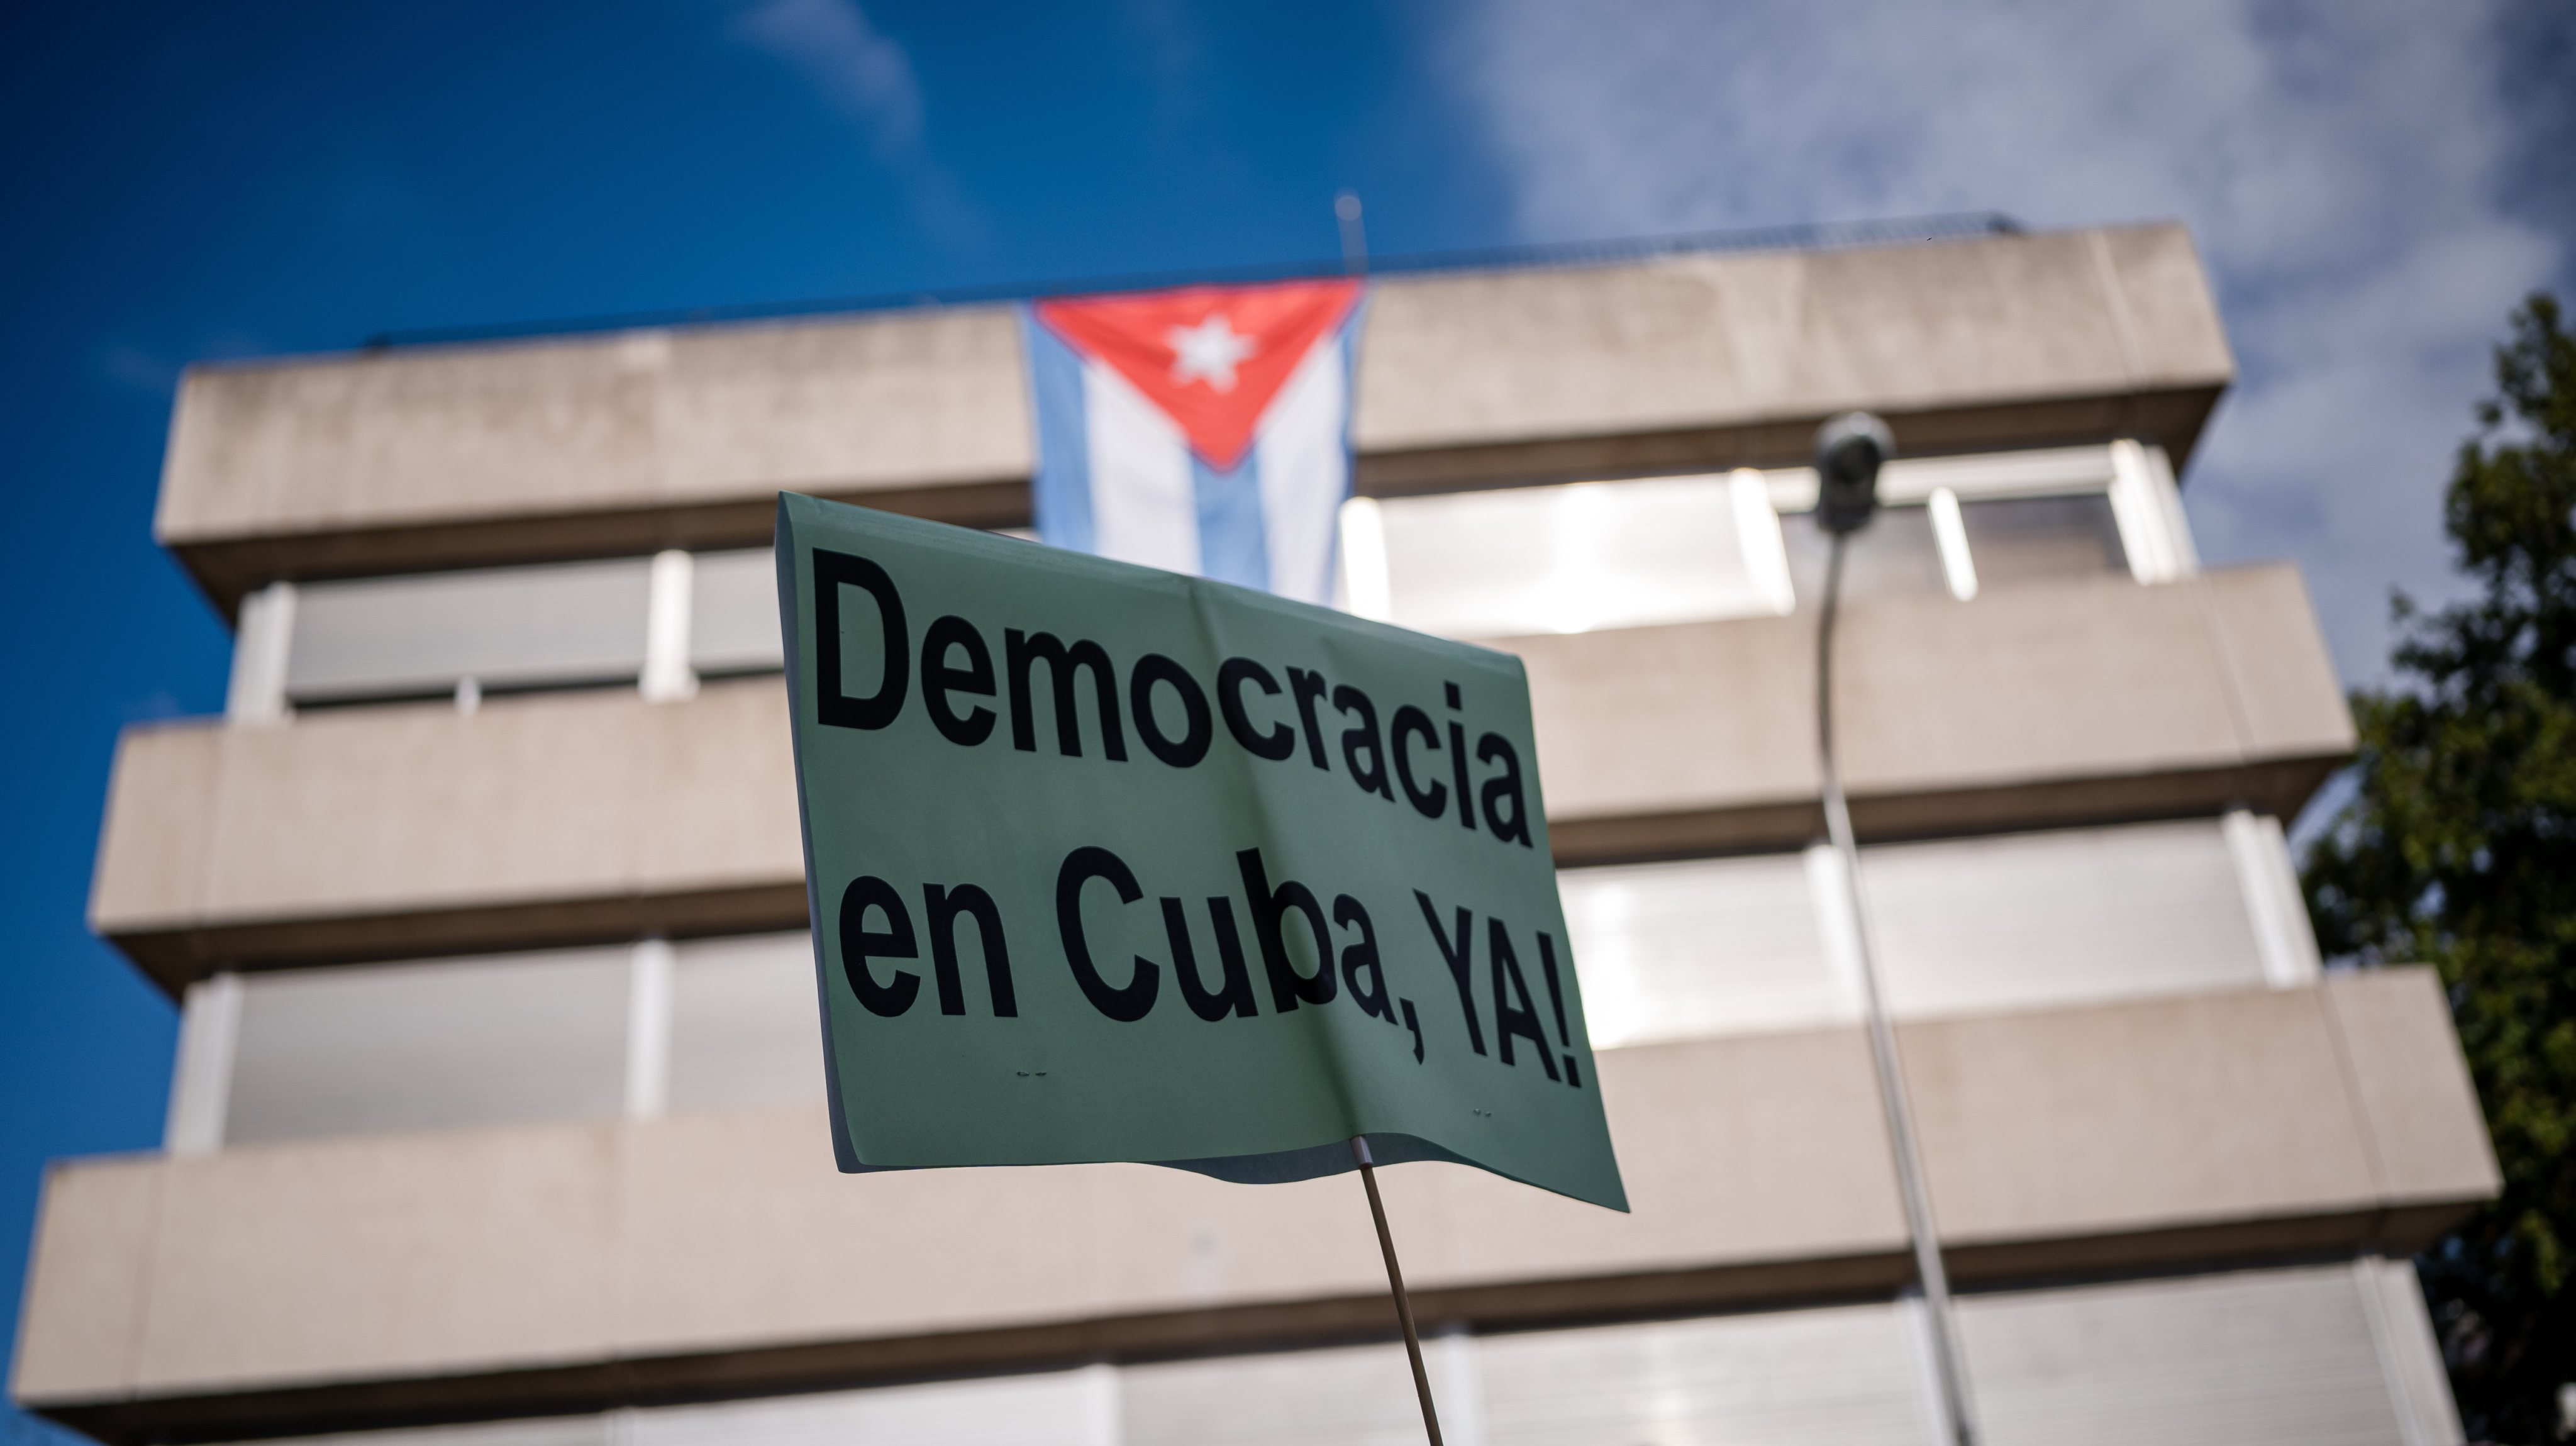 A placard demanding democracy in Cuba, during the